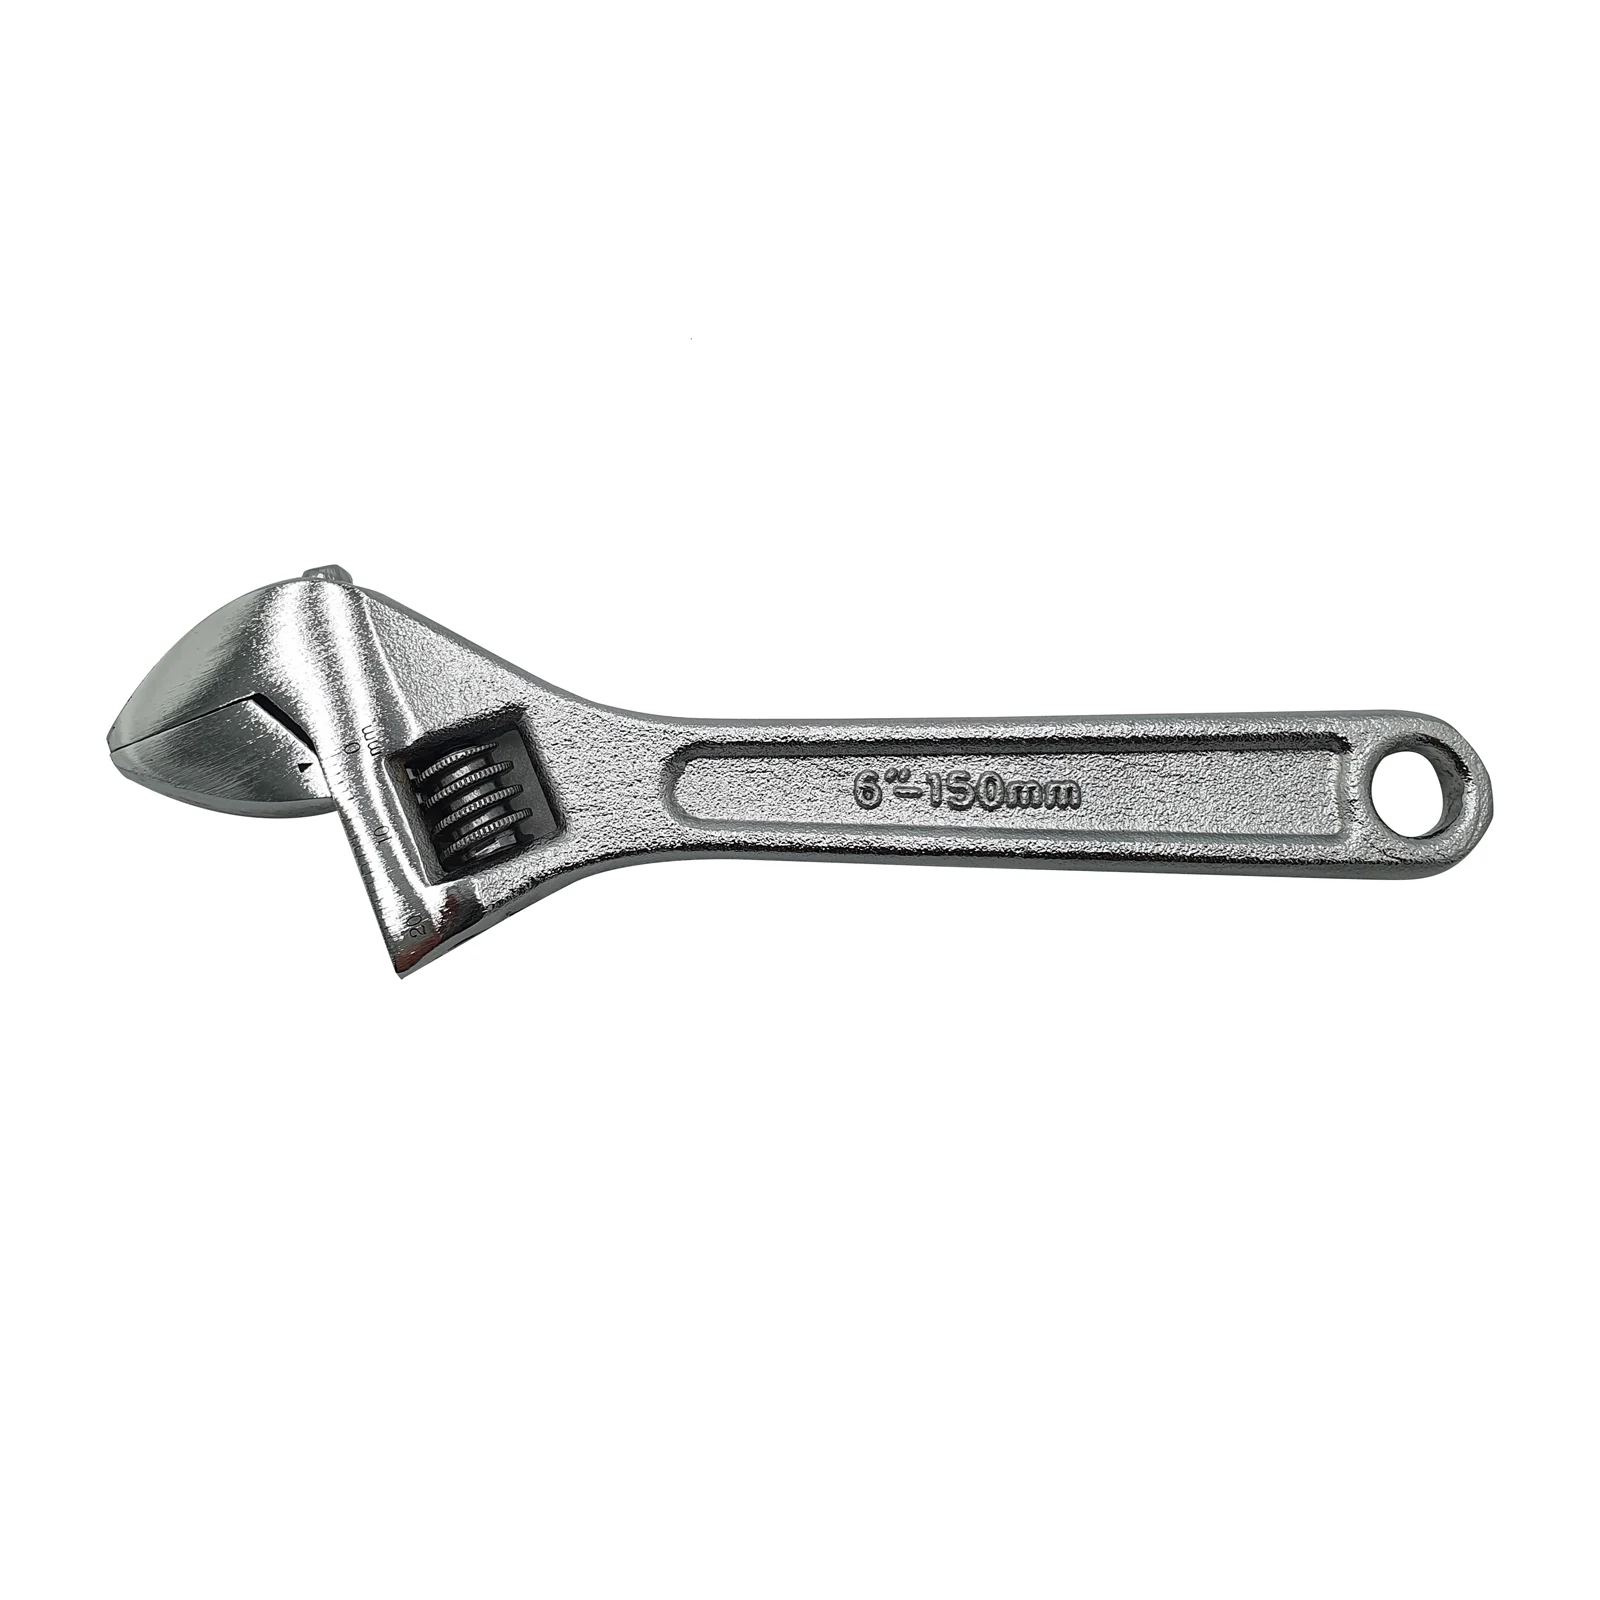 An adjustable wrench